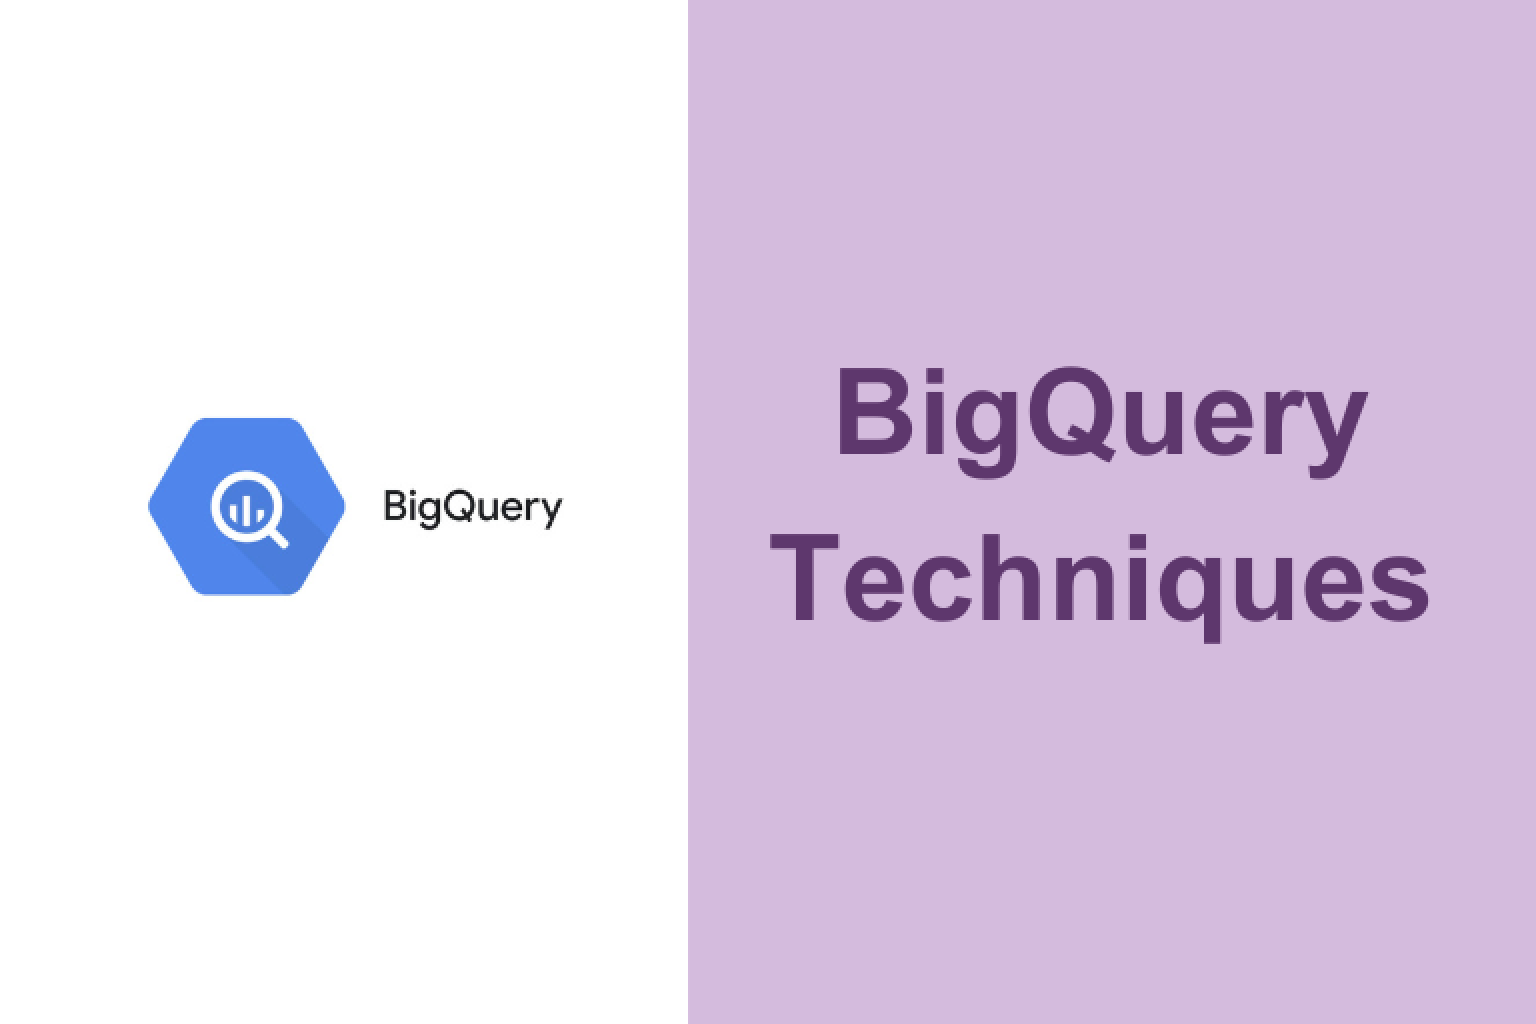 Discover the top BigQuery functions and techniques to optimize your data science projects and elevate your analytical skills to the next level.